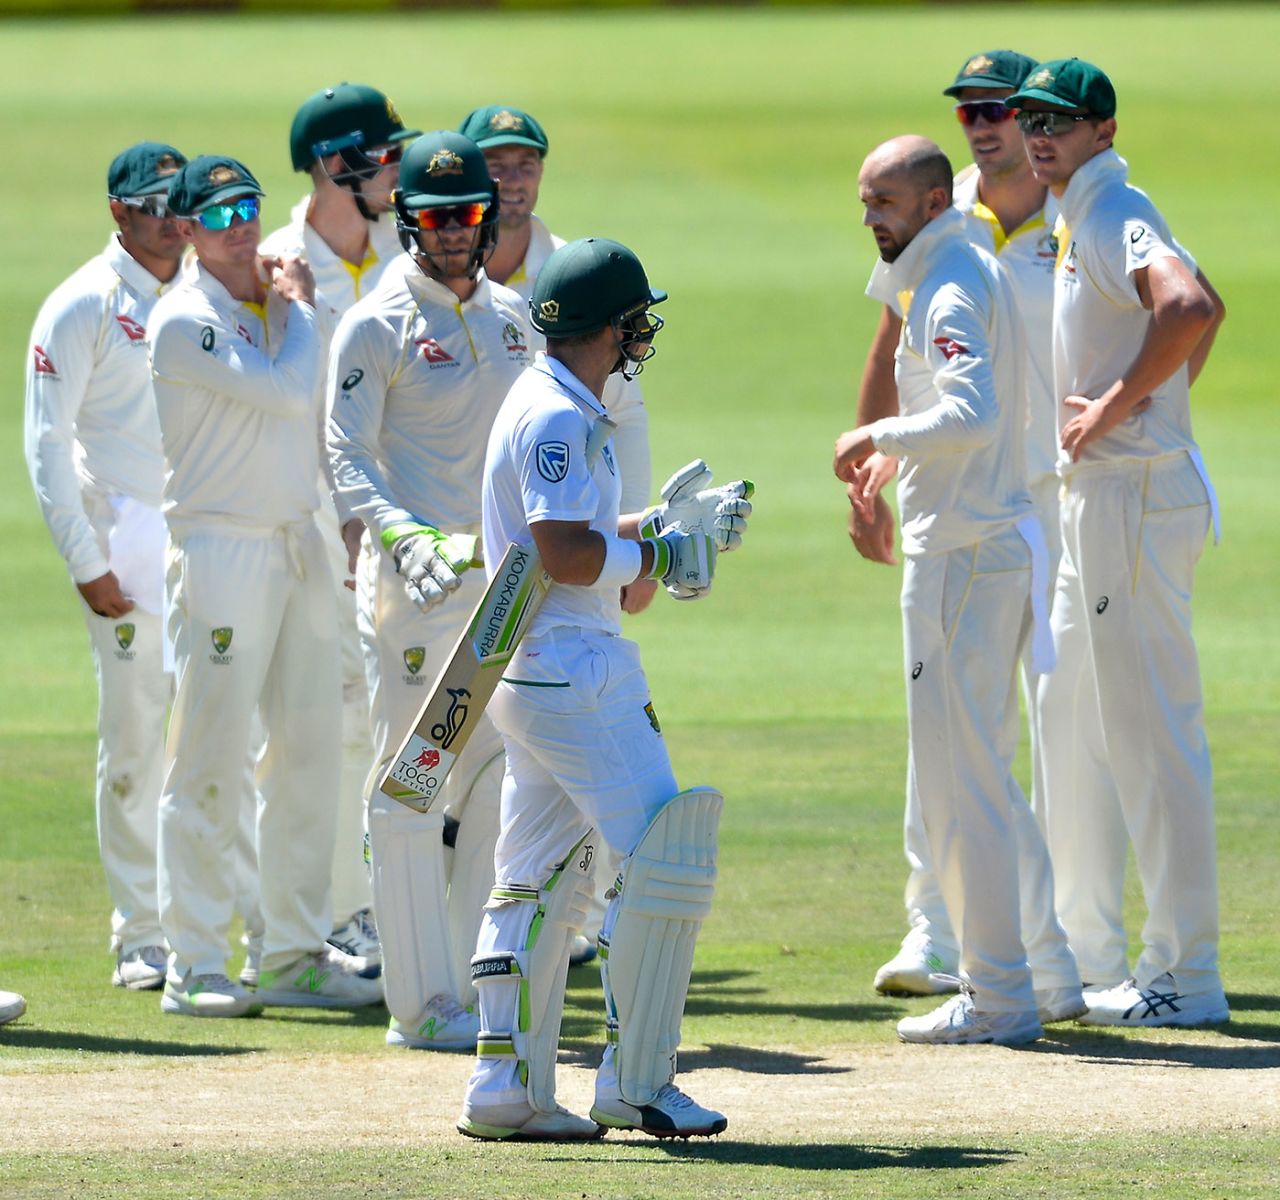 Nathan Lyon celebrates the wicket of Dean Elgar with his team-mates, South Africa v Australia, 2nd Test, Port Elizabeth, 4th day, March 12, 2018